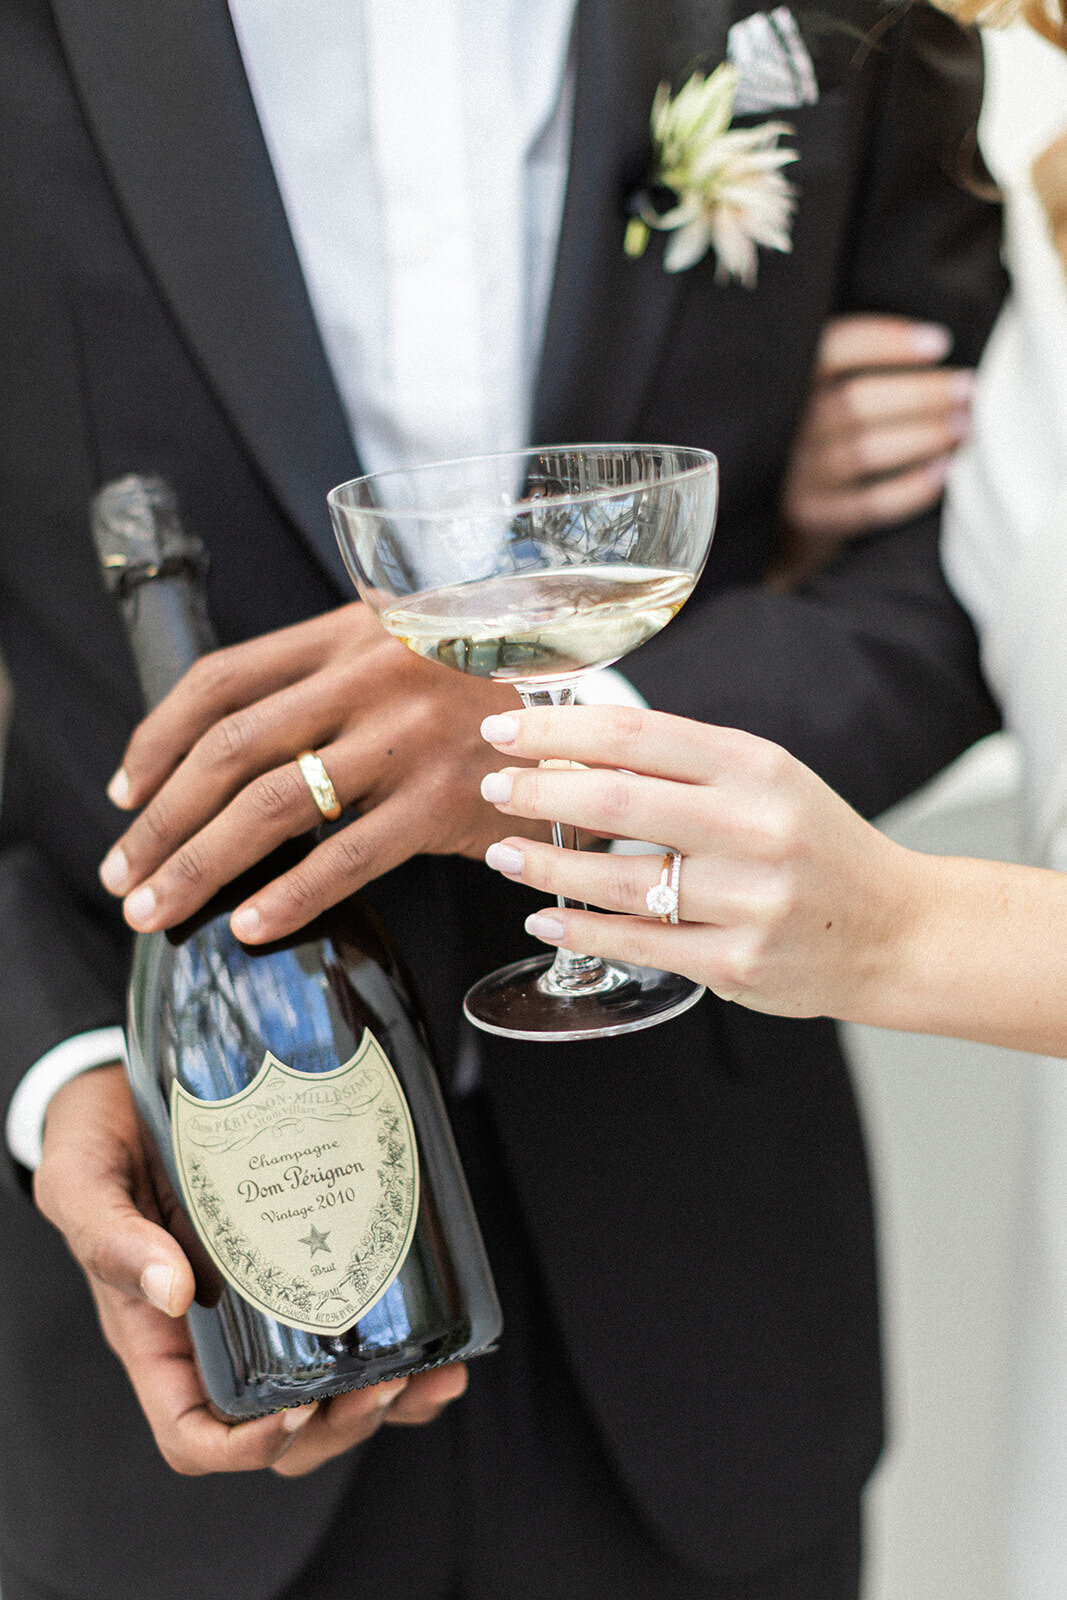 Kate-Murtaugh-Events-RI-wedding-planner-champagne-coupe-toast-diamond-ring